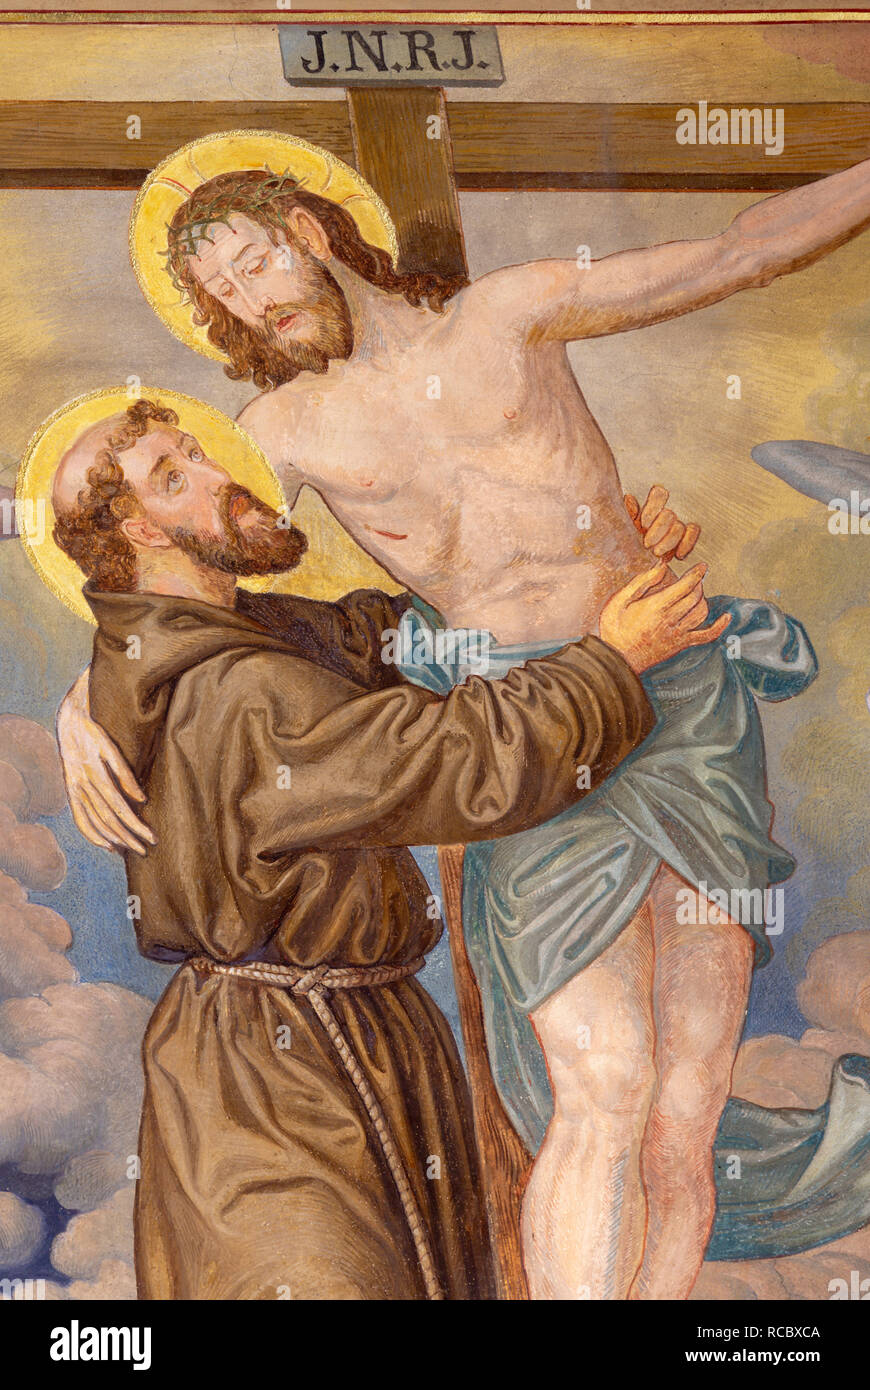 PRAGUE, CZECH REPUBLIC - OCTOBER 12, 2018: The symbolic idilic painting of St. Francis of Assisi and crucificted Jesus Stock Photo